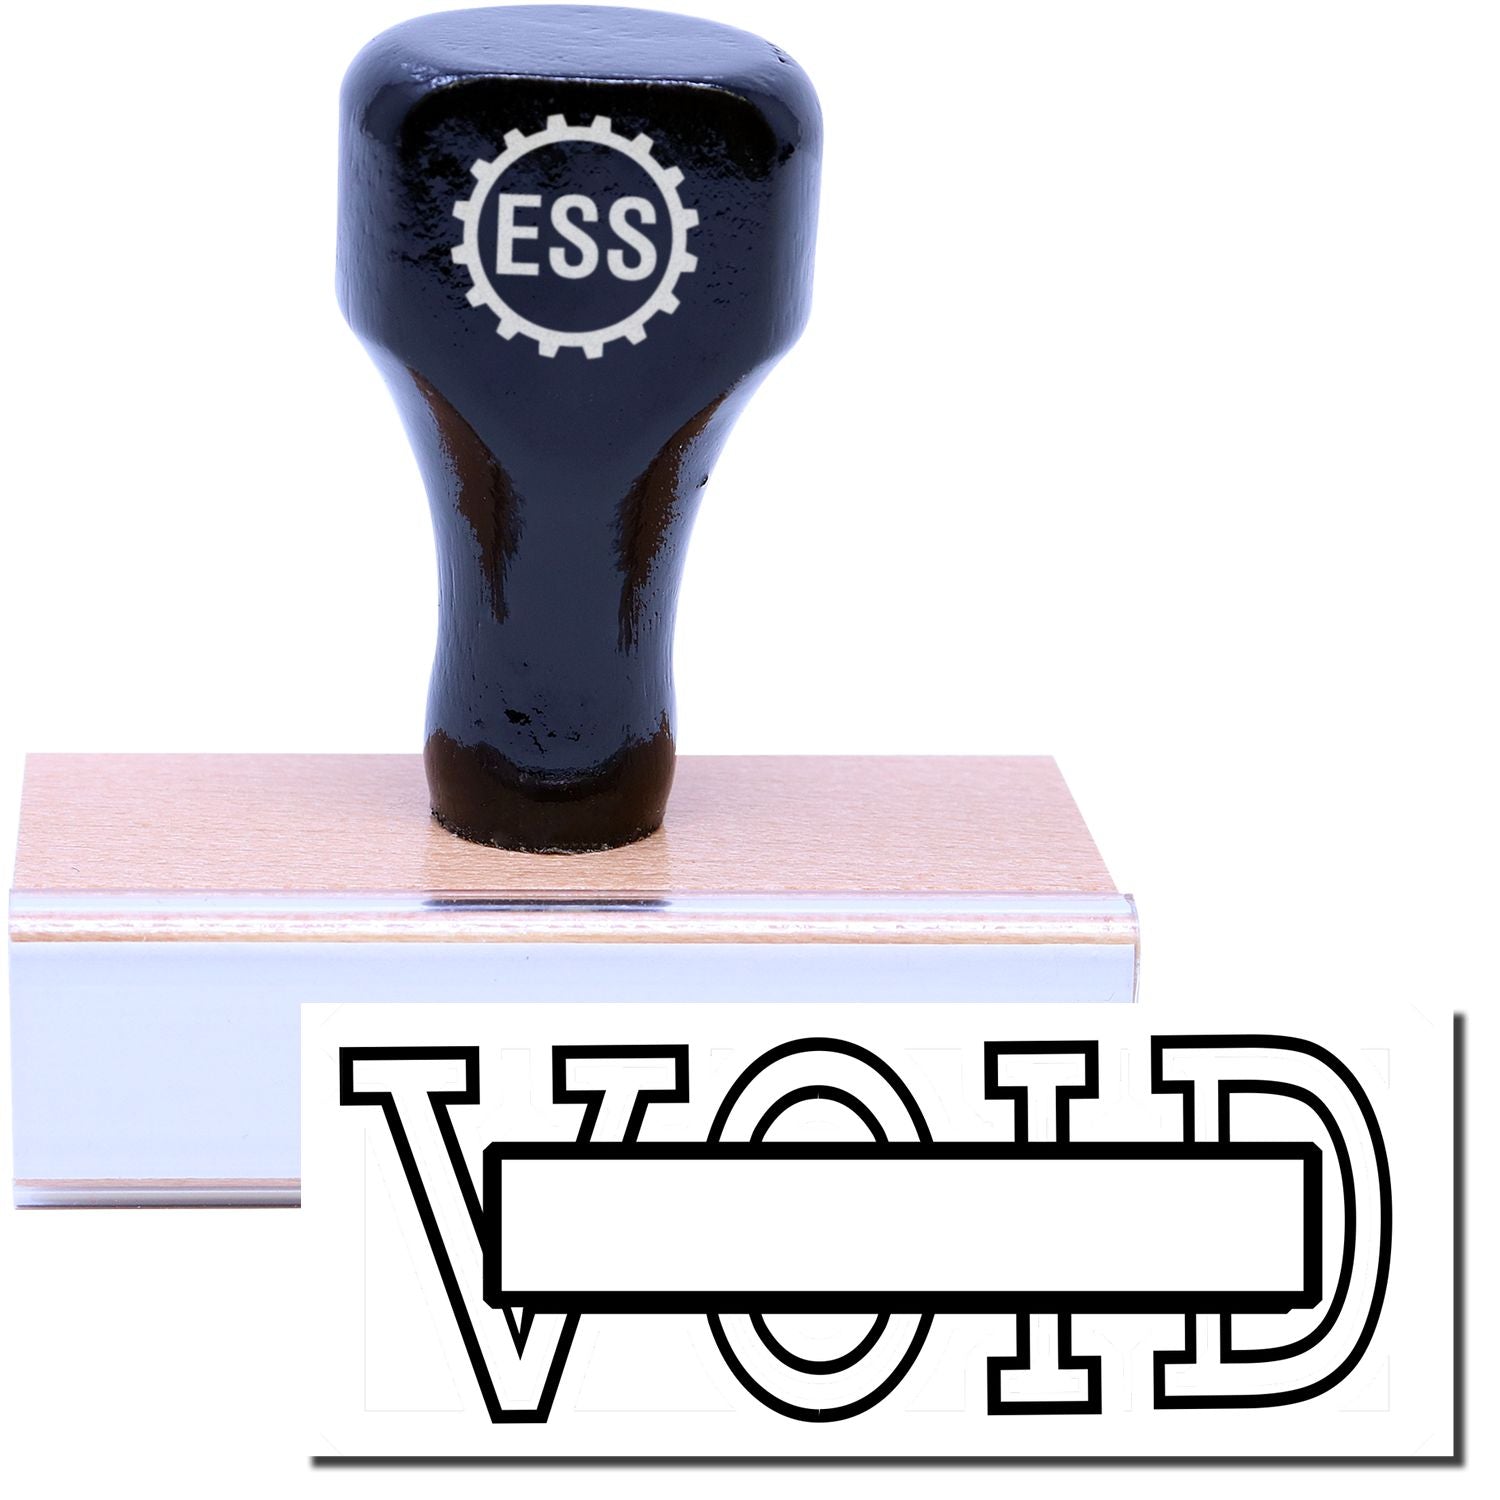 A stock office rubber stamp with a stamped image showing how the text "VOID" in a large outline font with a box in the center of the text is displayed after stamping.